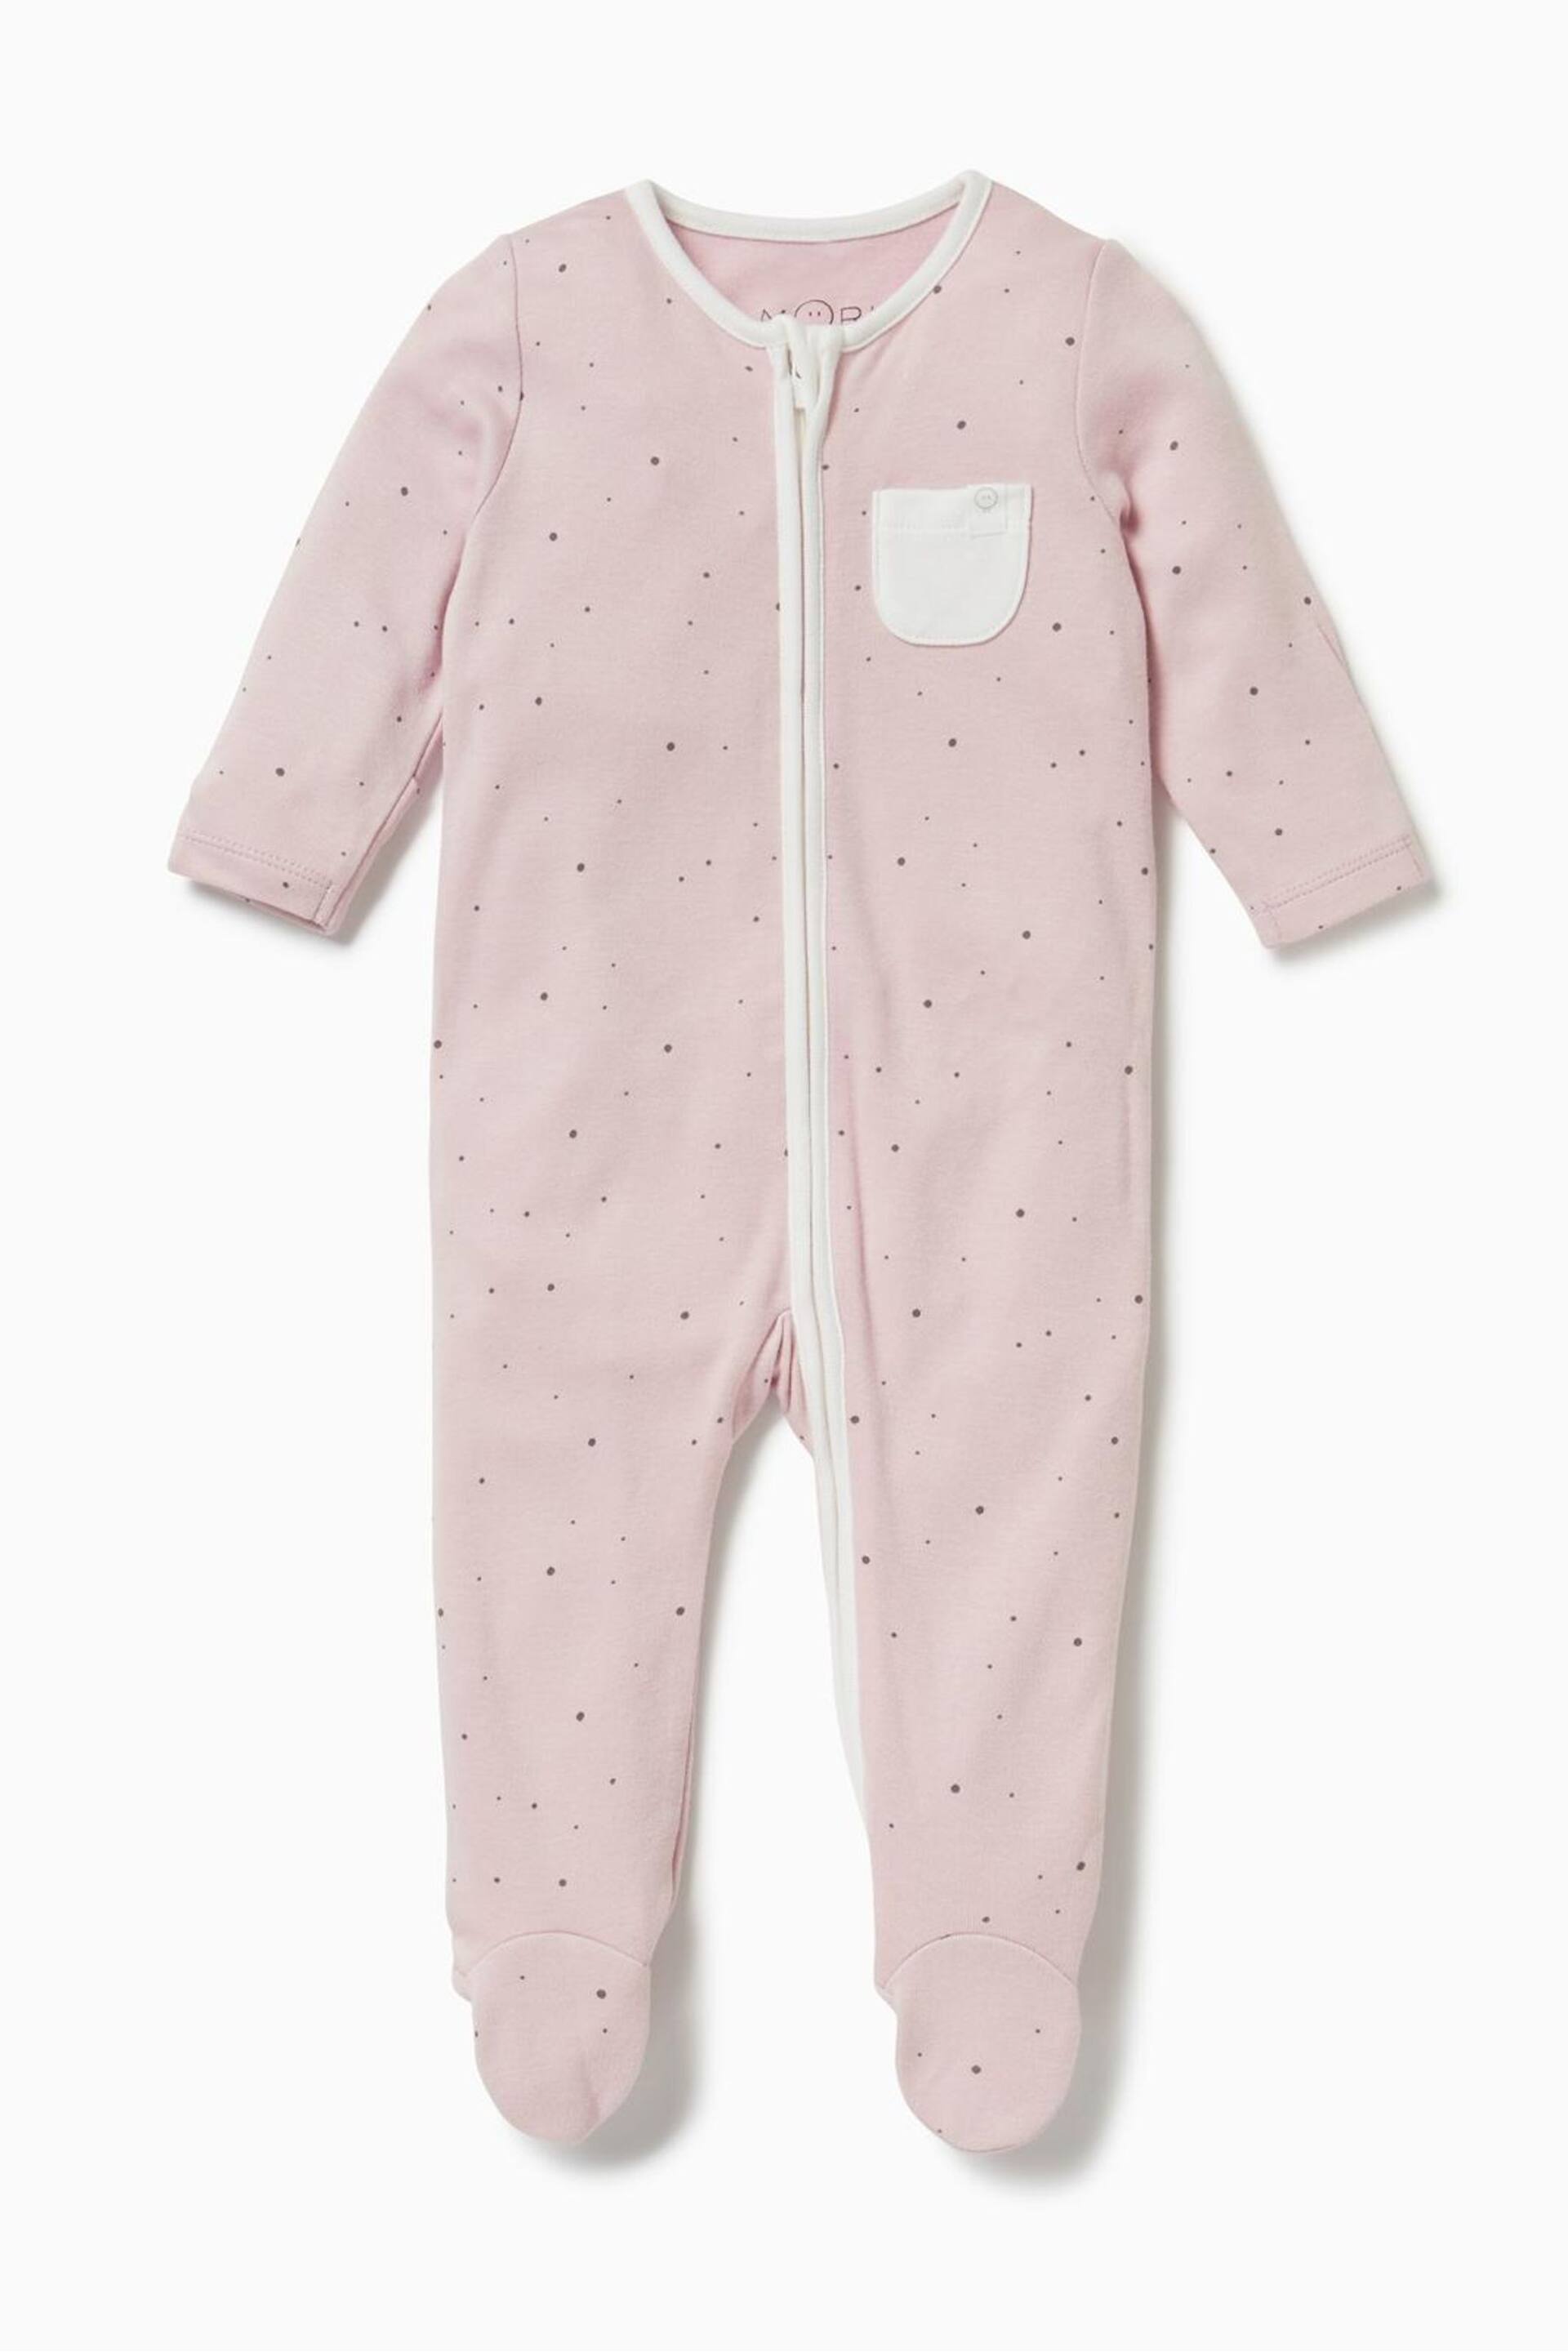 Mori Organic Cotton & Bamboo Clever Zip Up Sleepsuit - Image 3 of 5